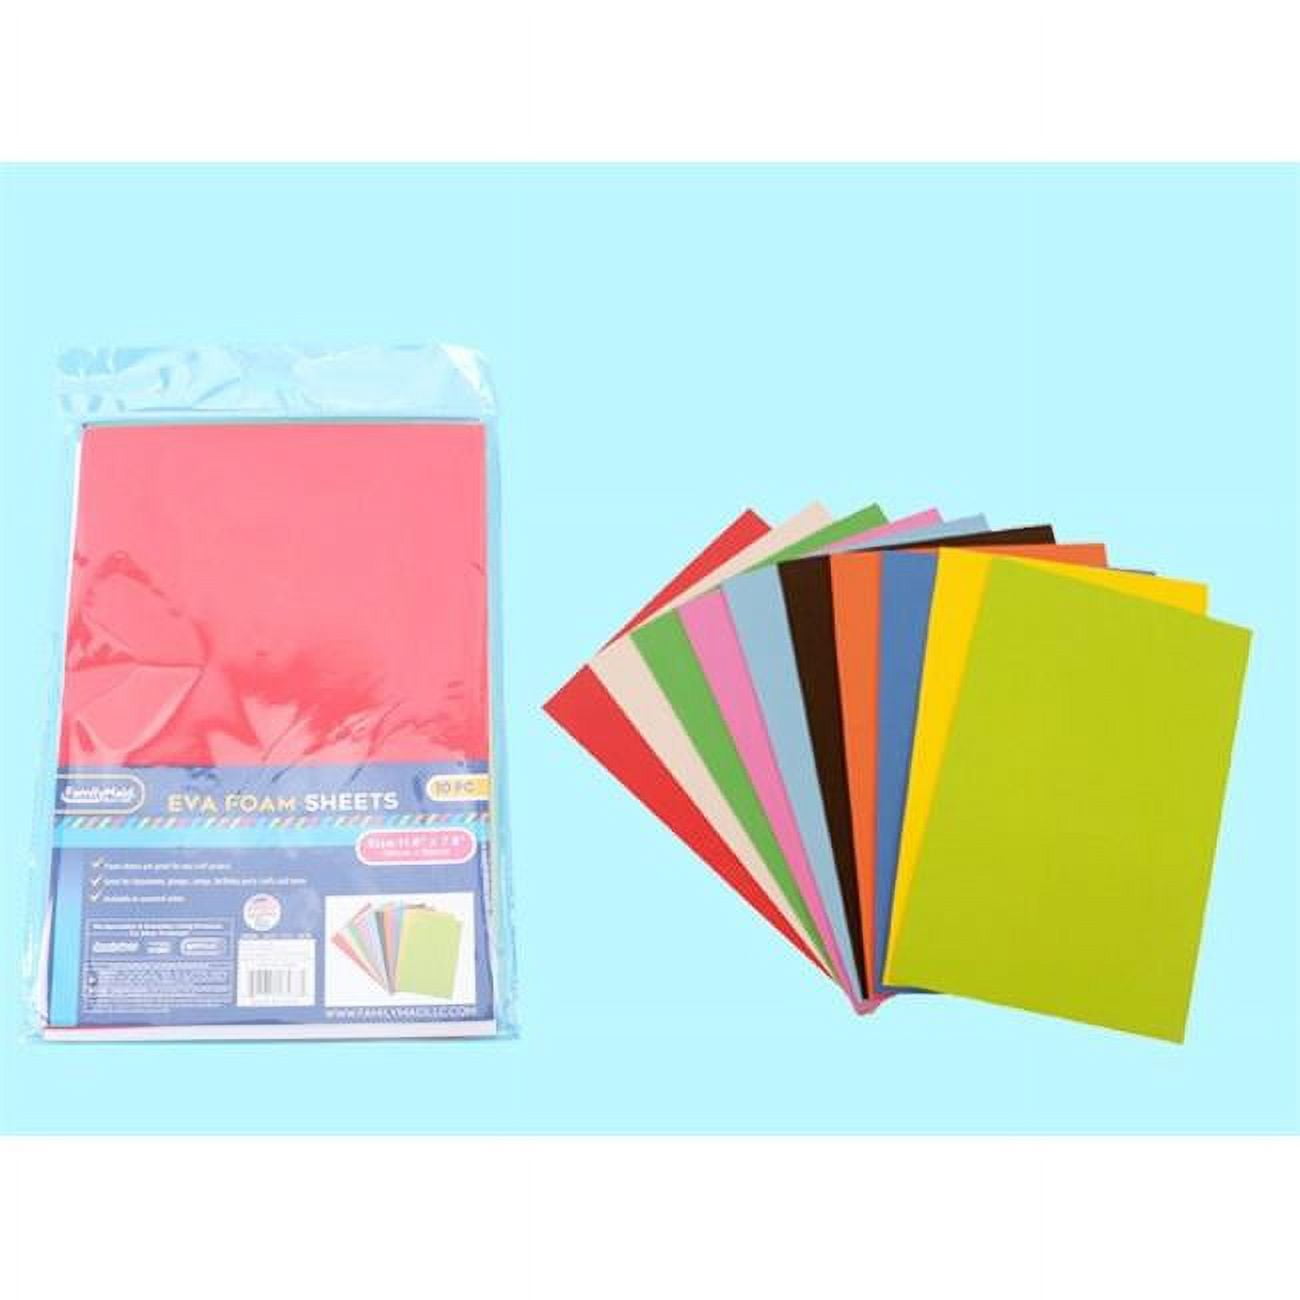 FamilyMaid 26988 11.8 x 7.9 Assorted Color Eva Foam Sheets, 10 Piece - Pack of 96 -  Family Maid